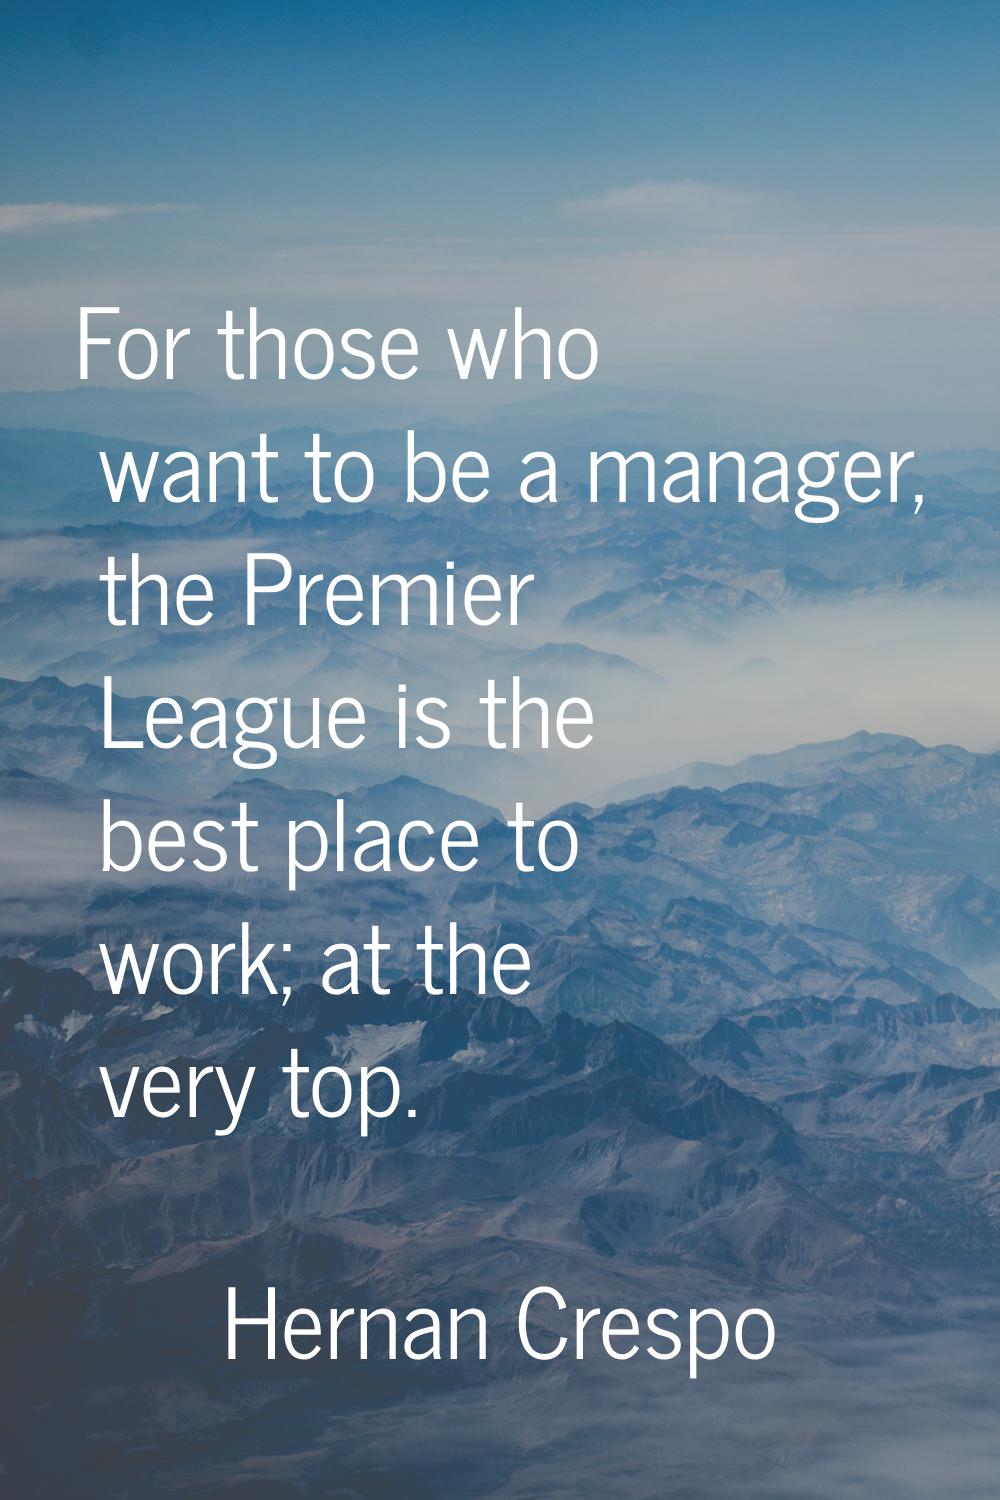 For those who want to be a manager, the Premier League is the best place to work; at the very top.